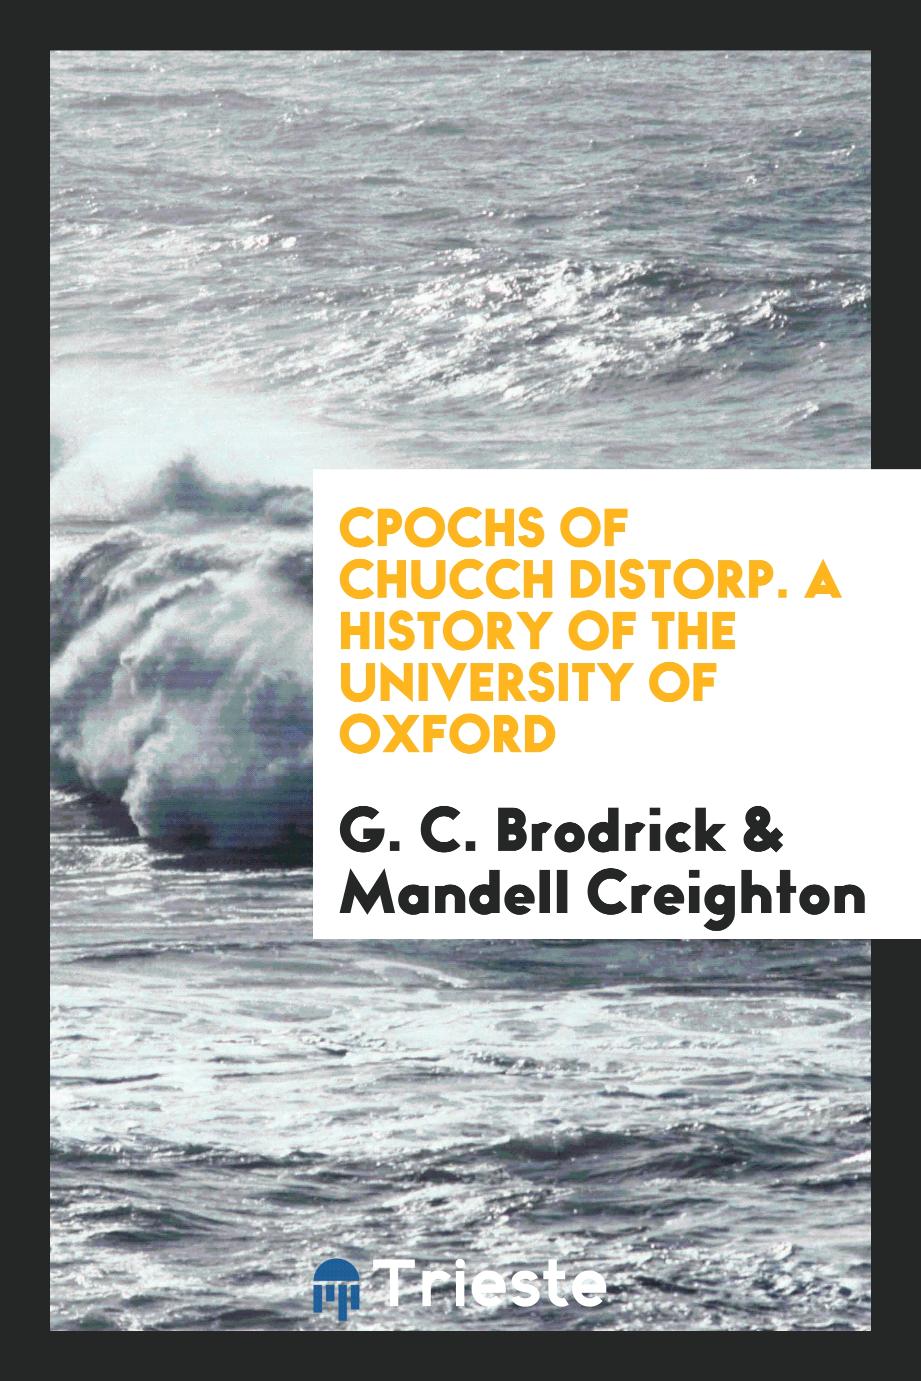 Cpochs of Chucch Distorp. A History of the University of Oxford